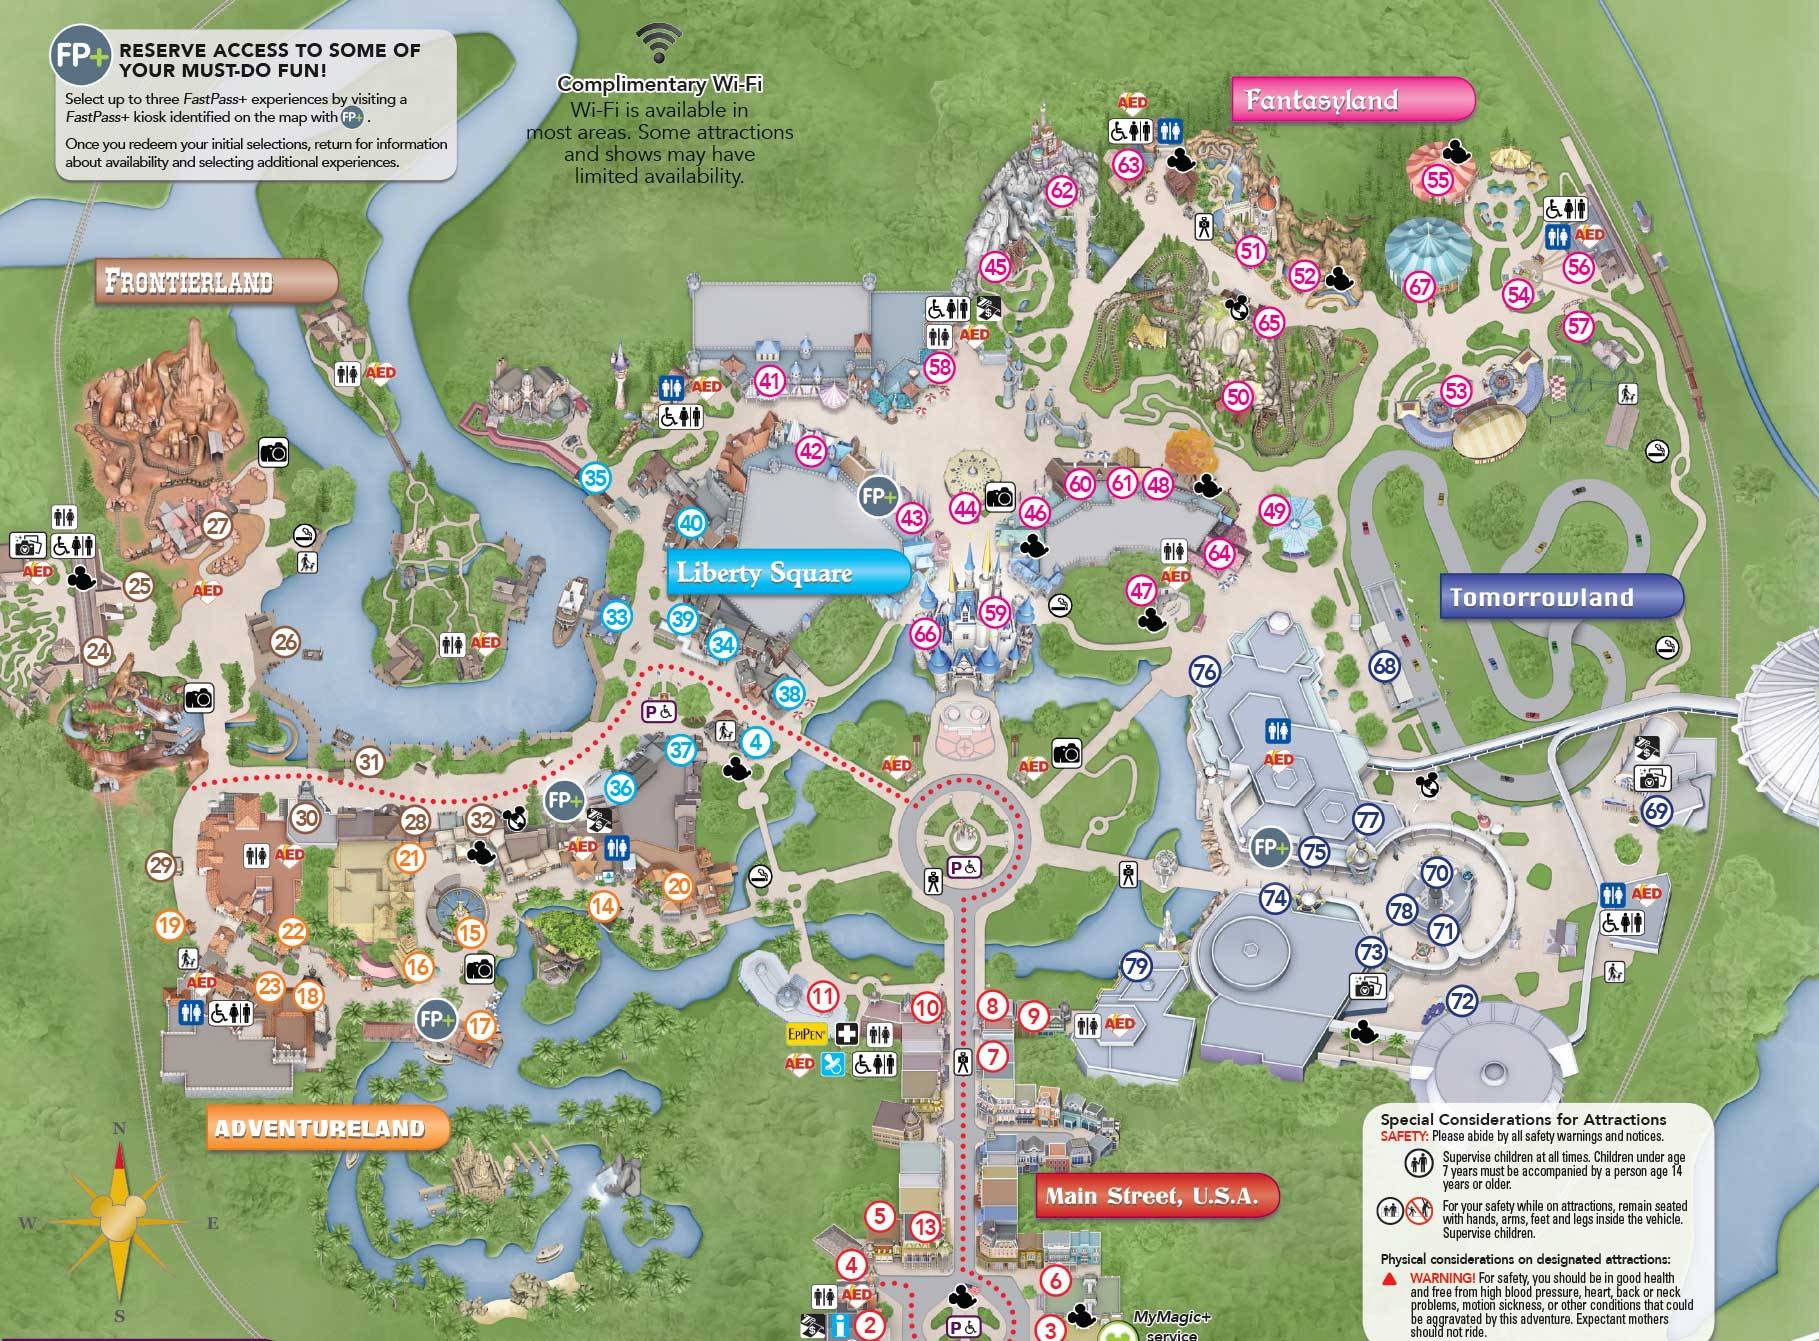 PHOTOS - New Magic Kingdom guide map shows changes to the hub area